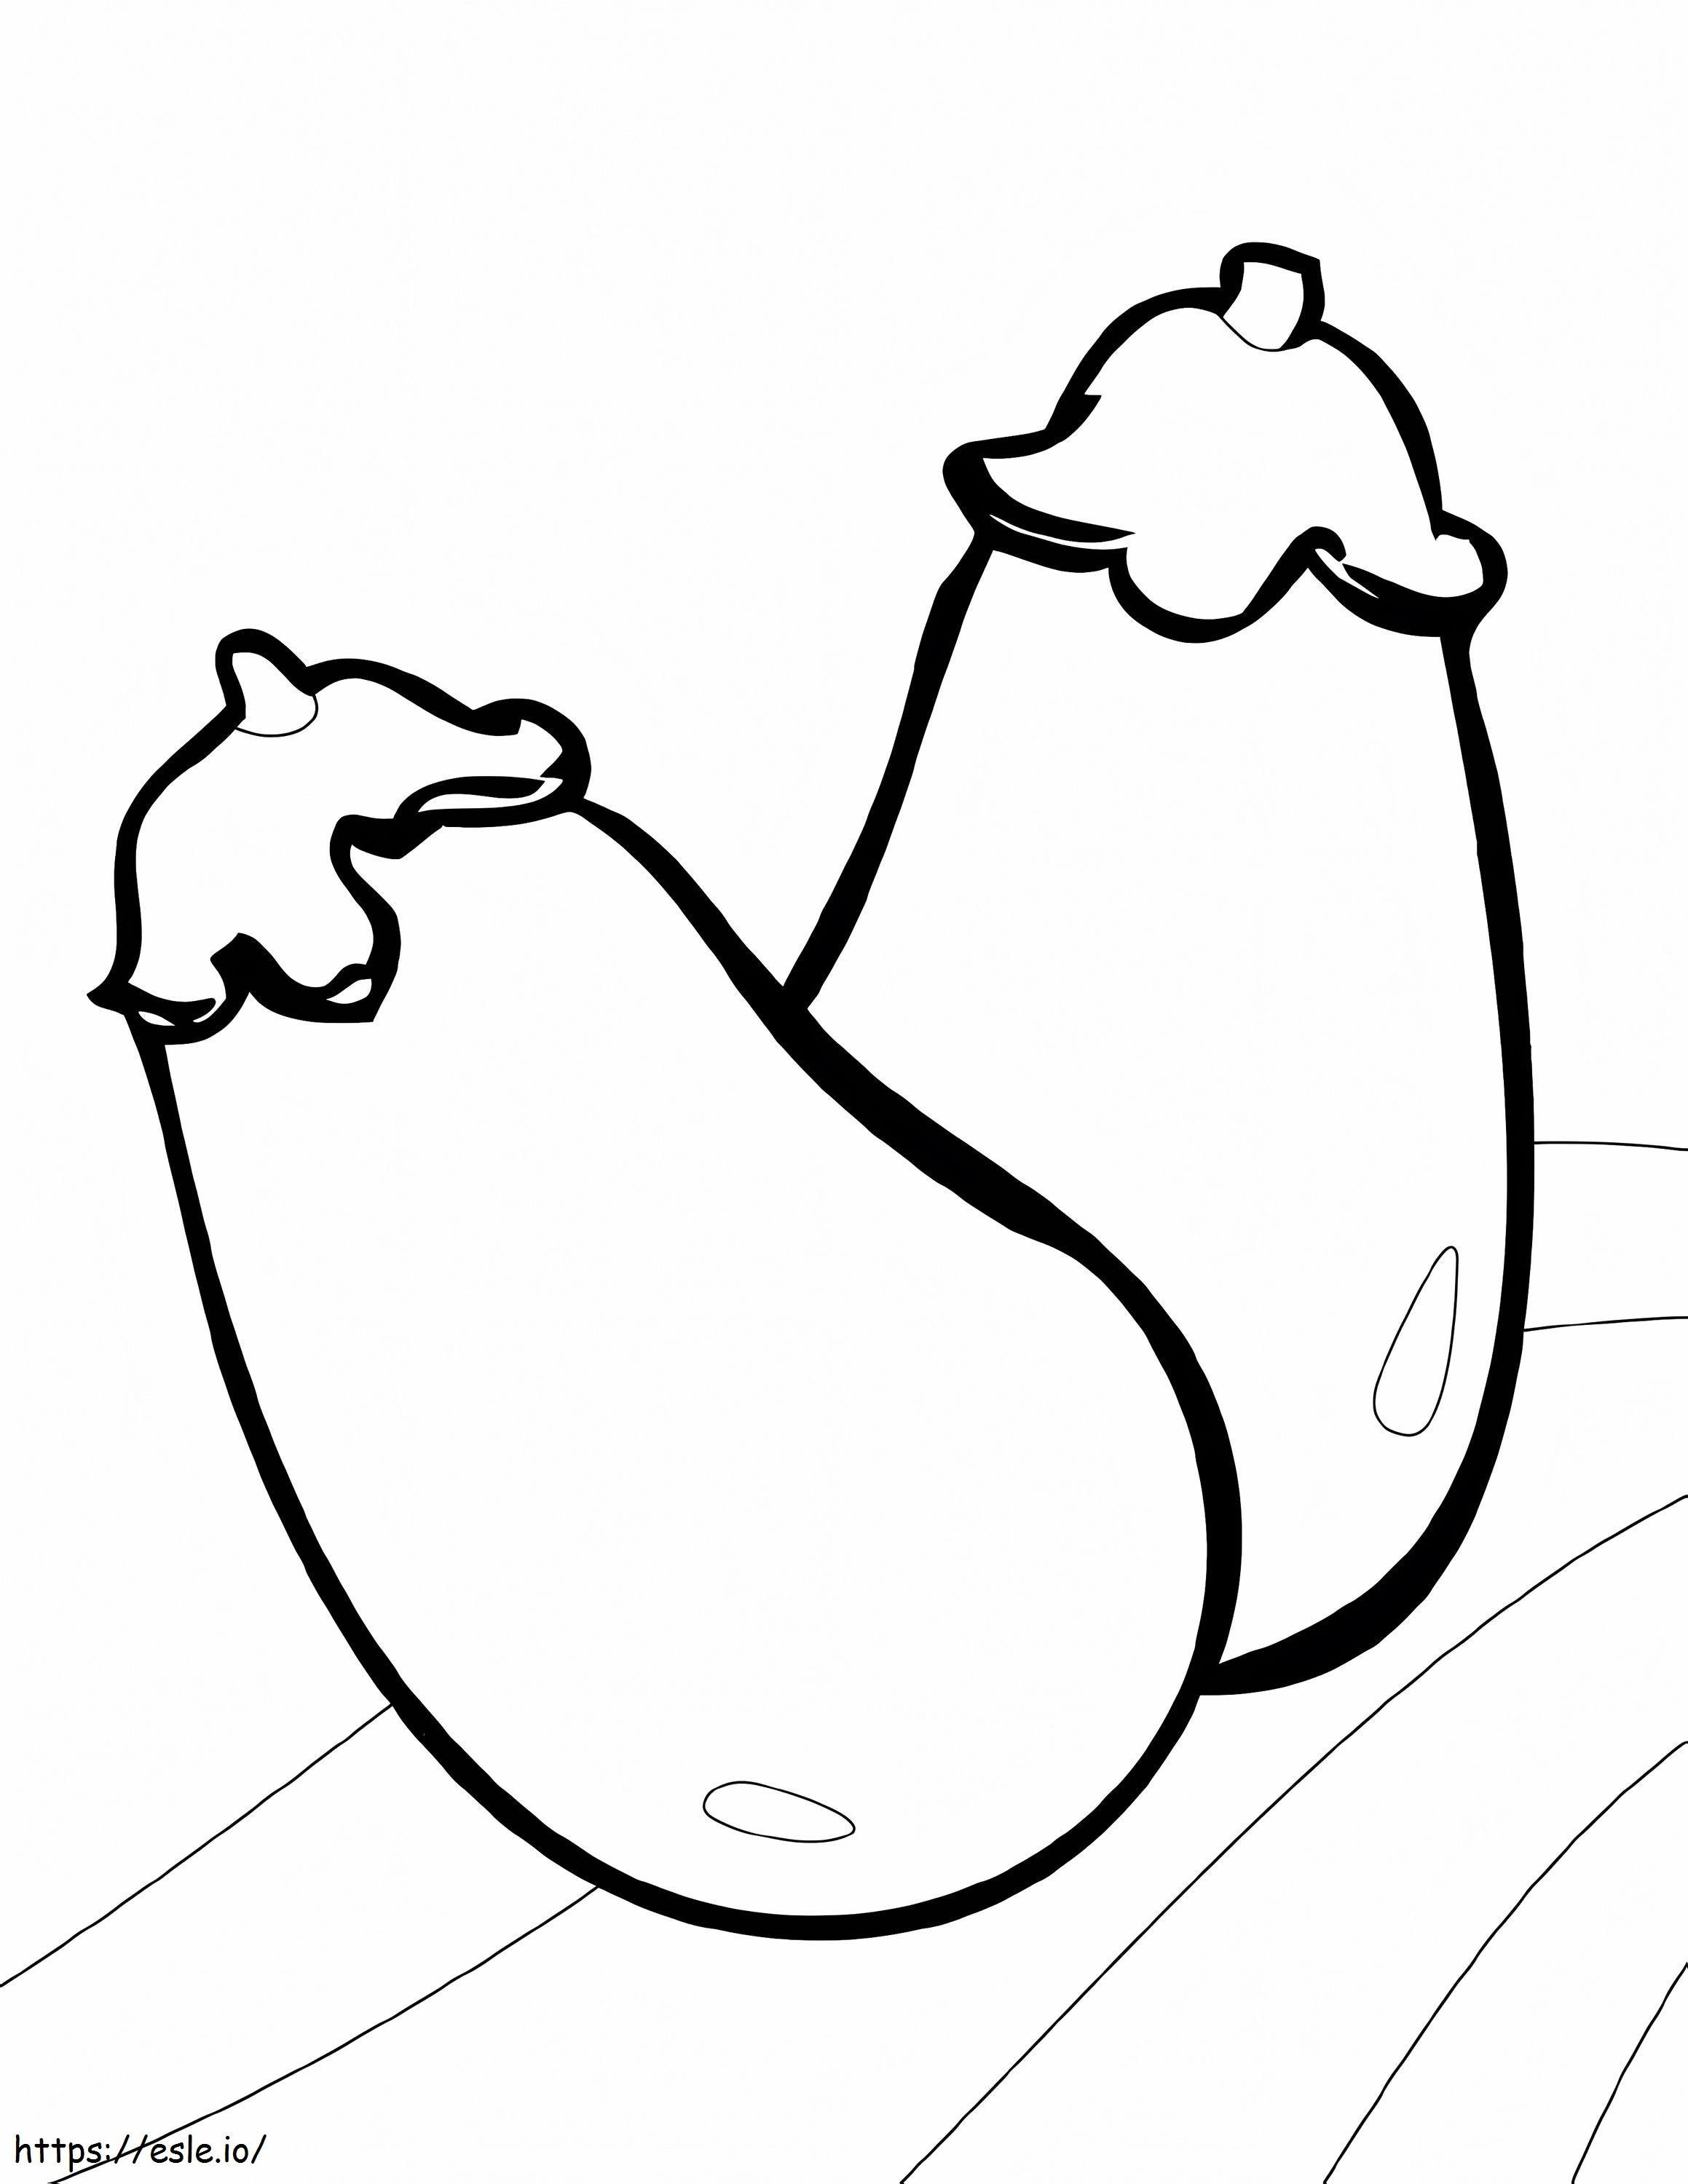 Two Eggplants coloring page